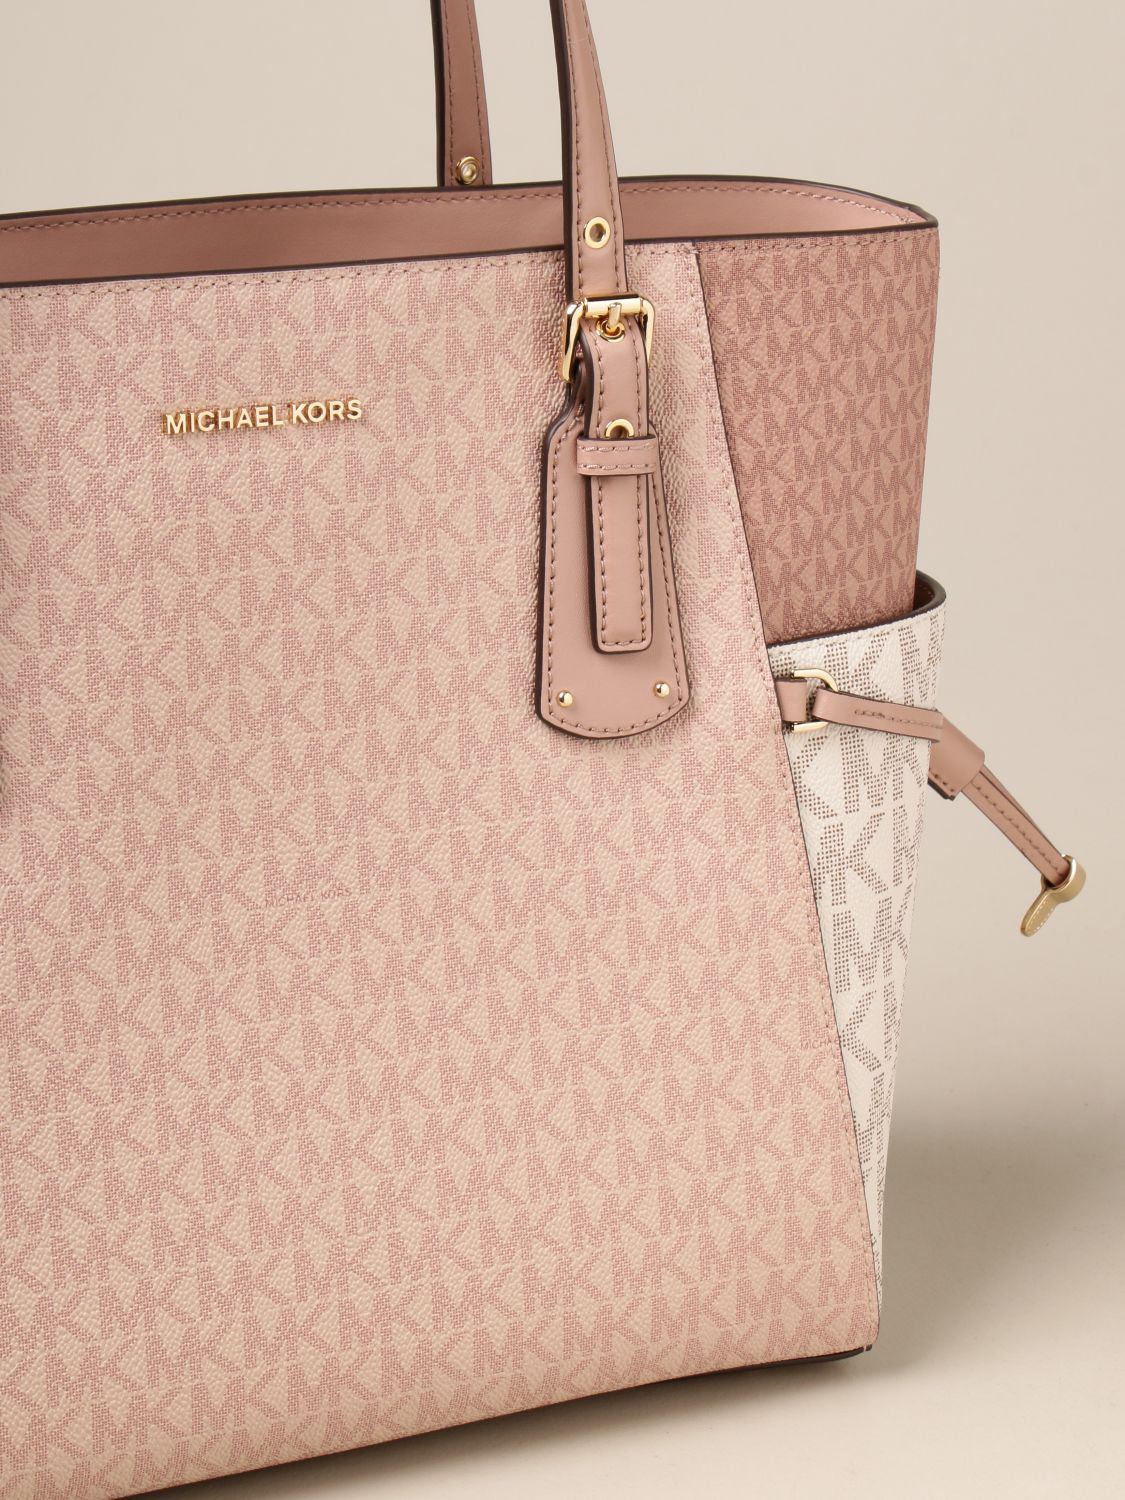 bolso rosa michael kors Best-Selling Promotional Products & Wholesale | Free Shipping